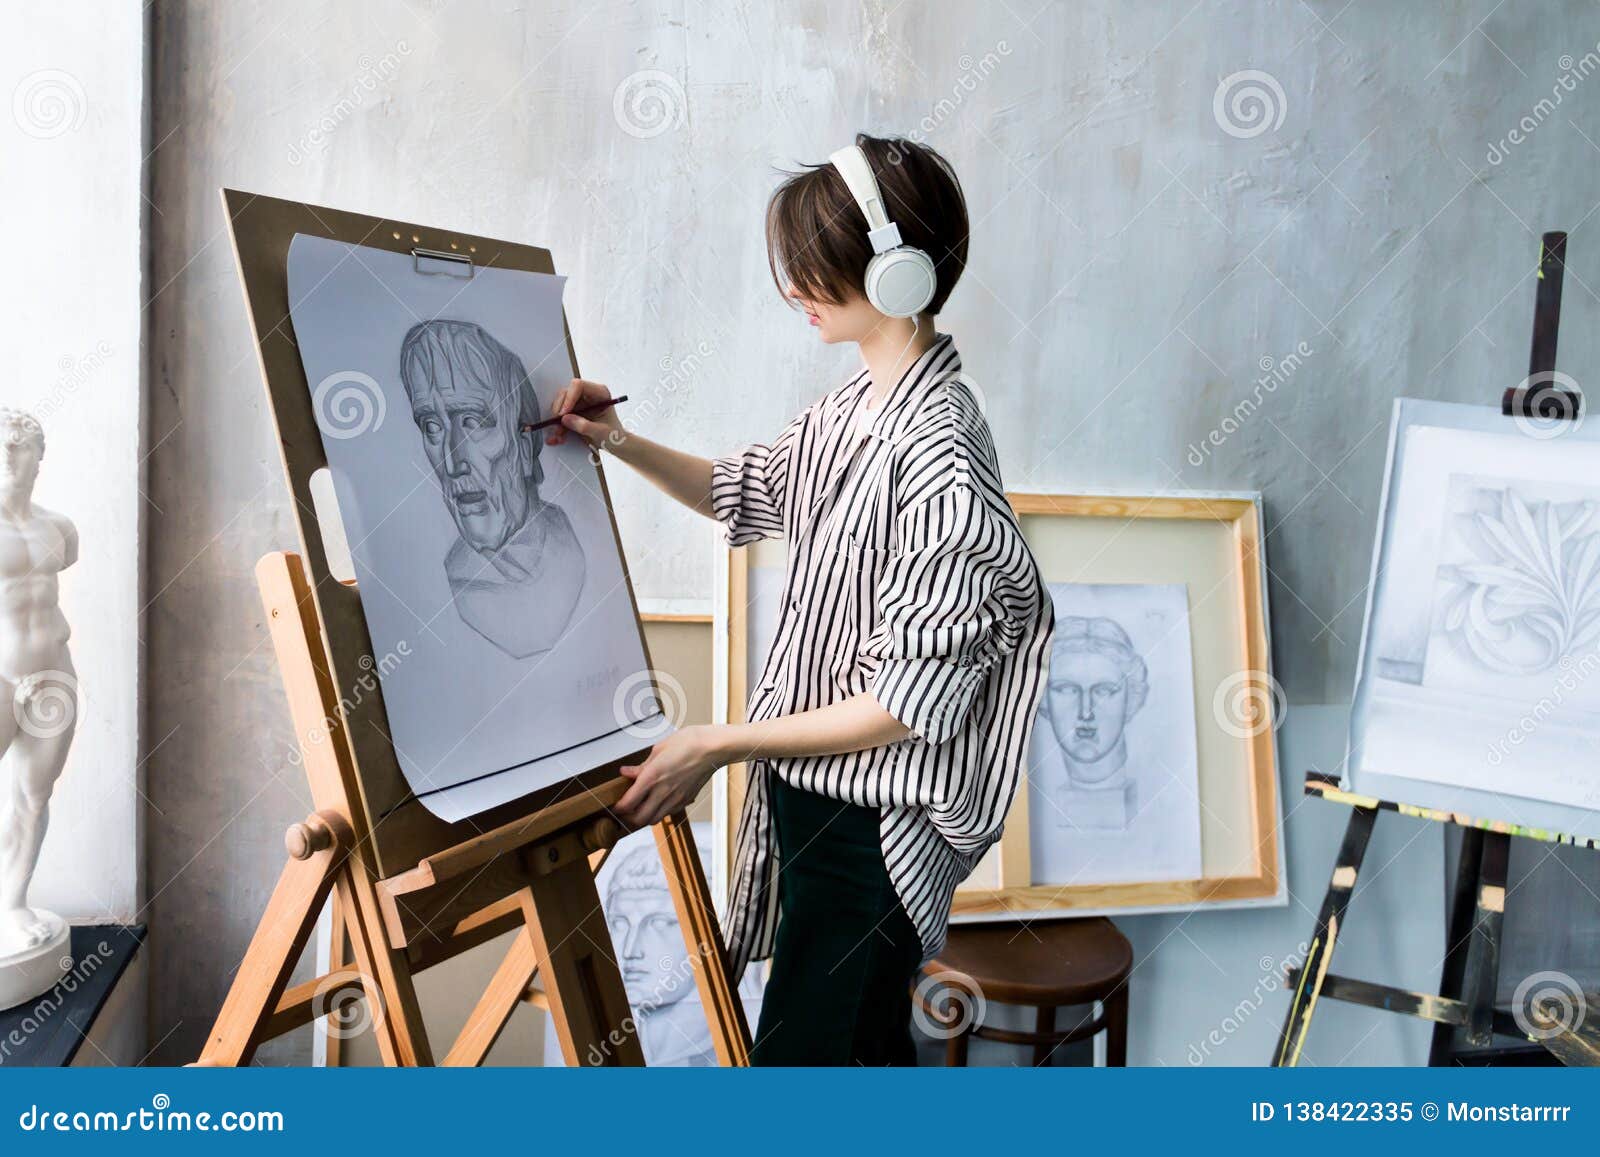 Young Student Artist At Art Workplace Stock Image Image